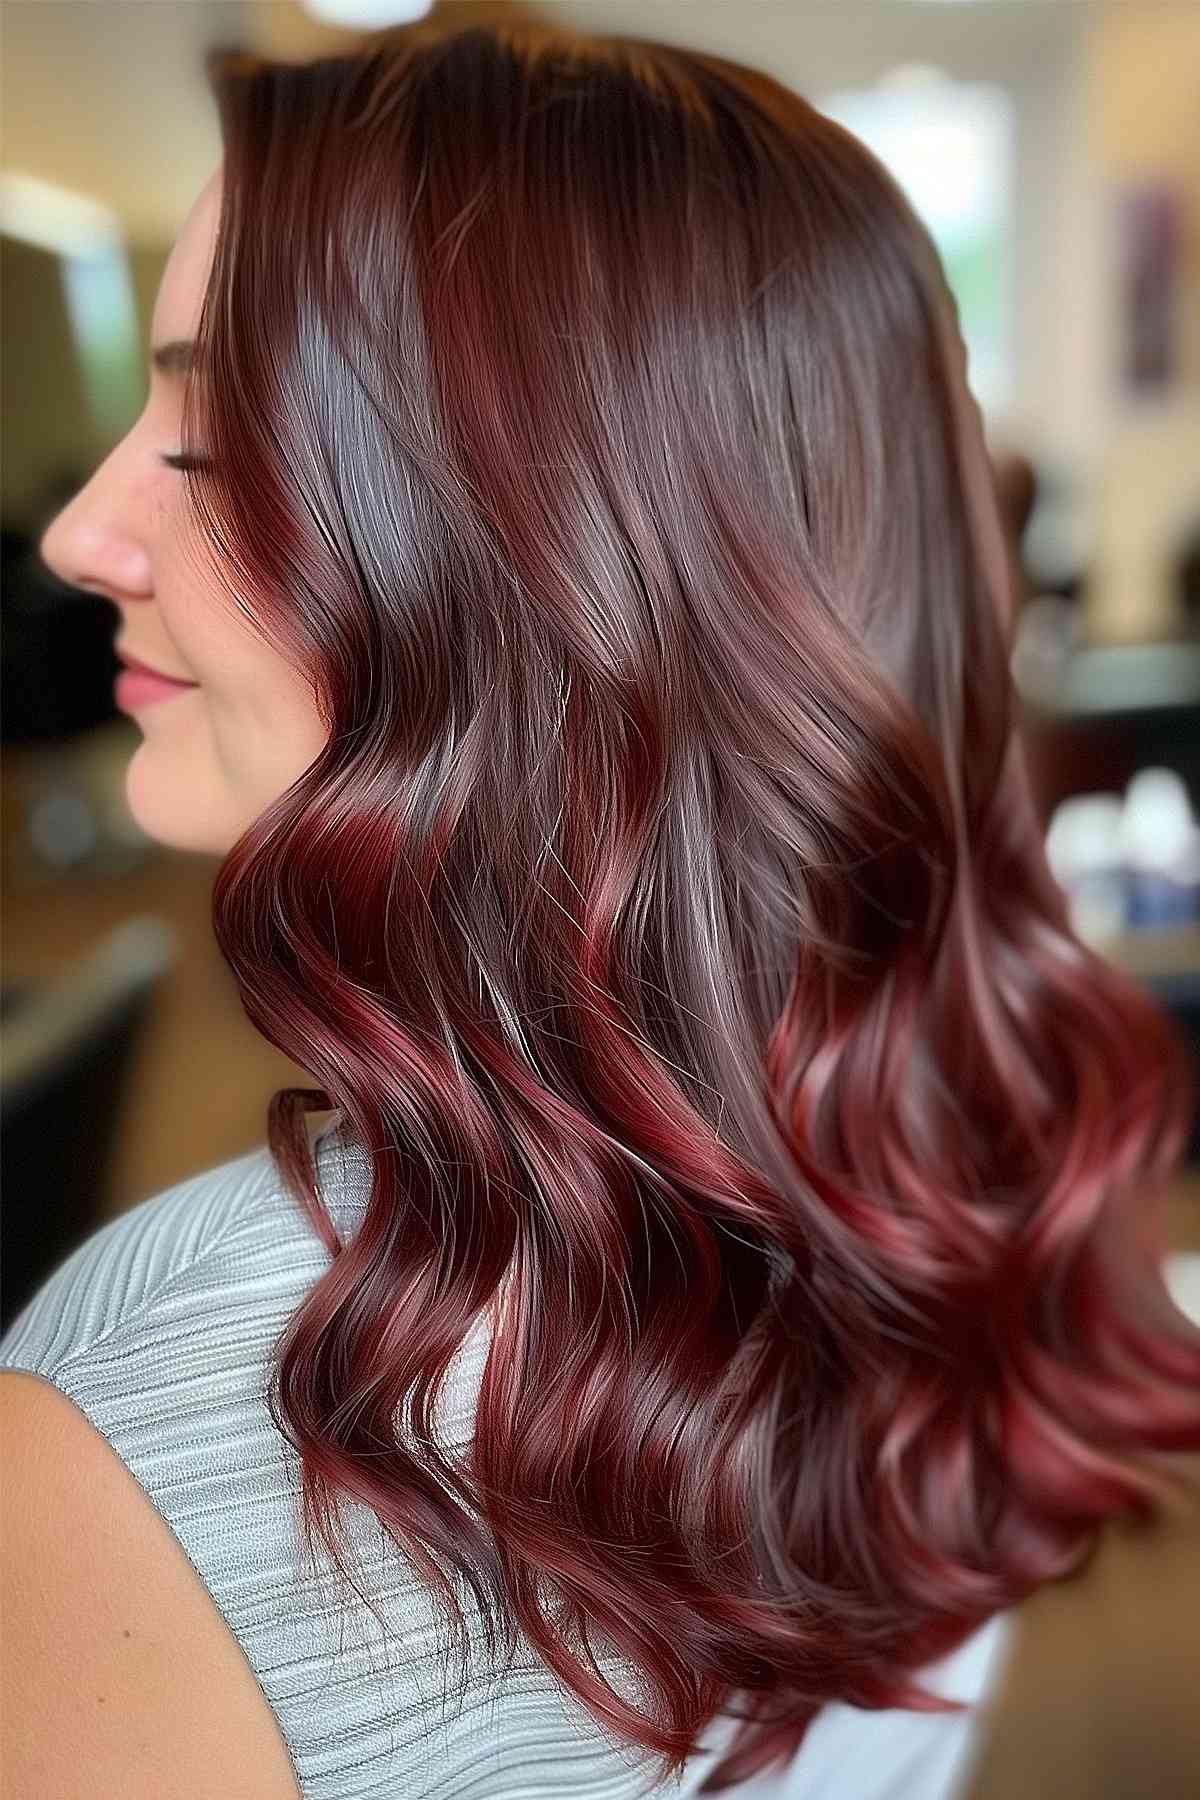 Long wavy hair with a chocolate cherry red blend for a warm and rich hair color.